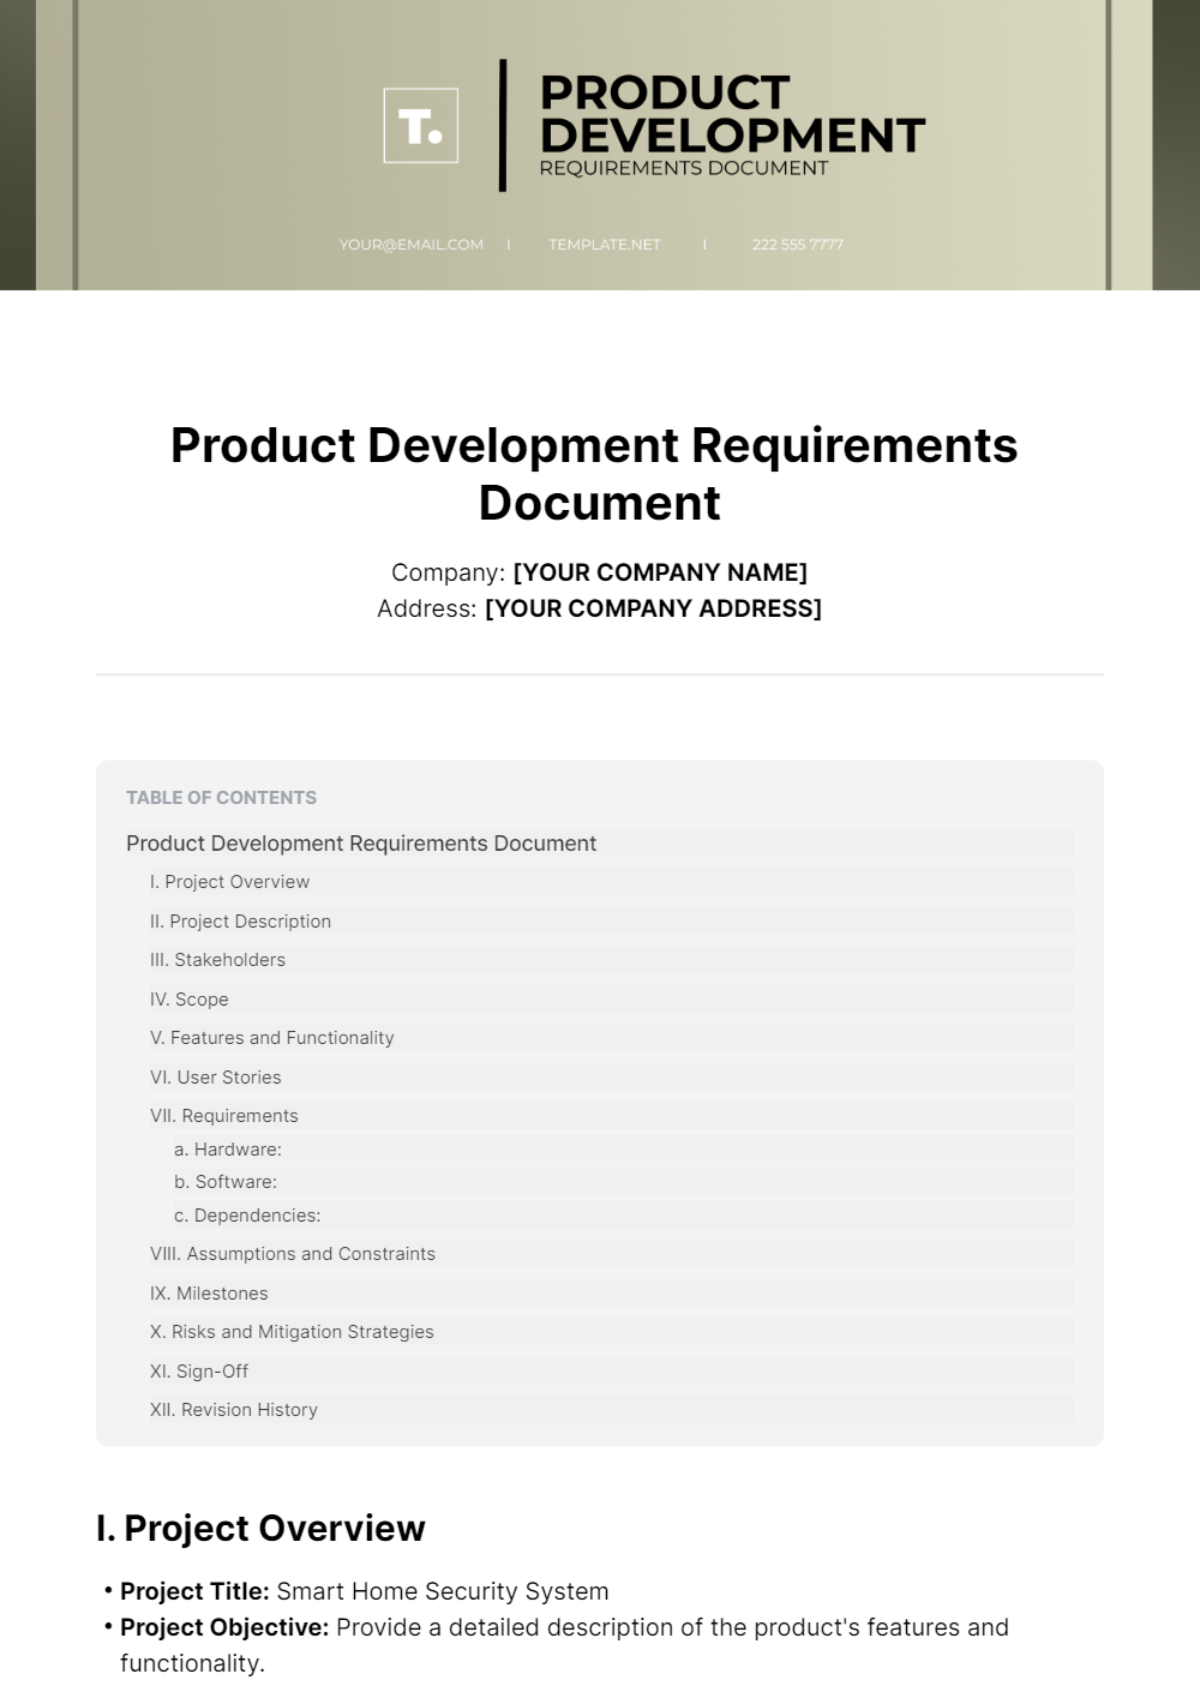 Product Development Requirements Document Template